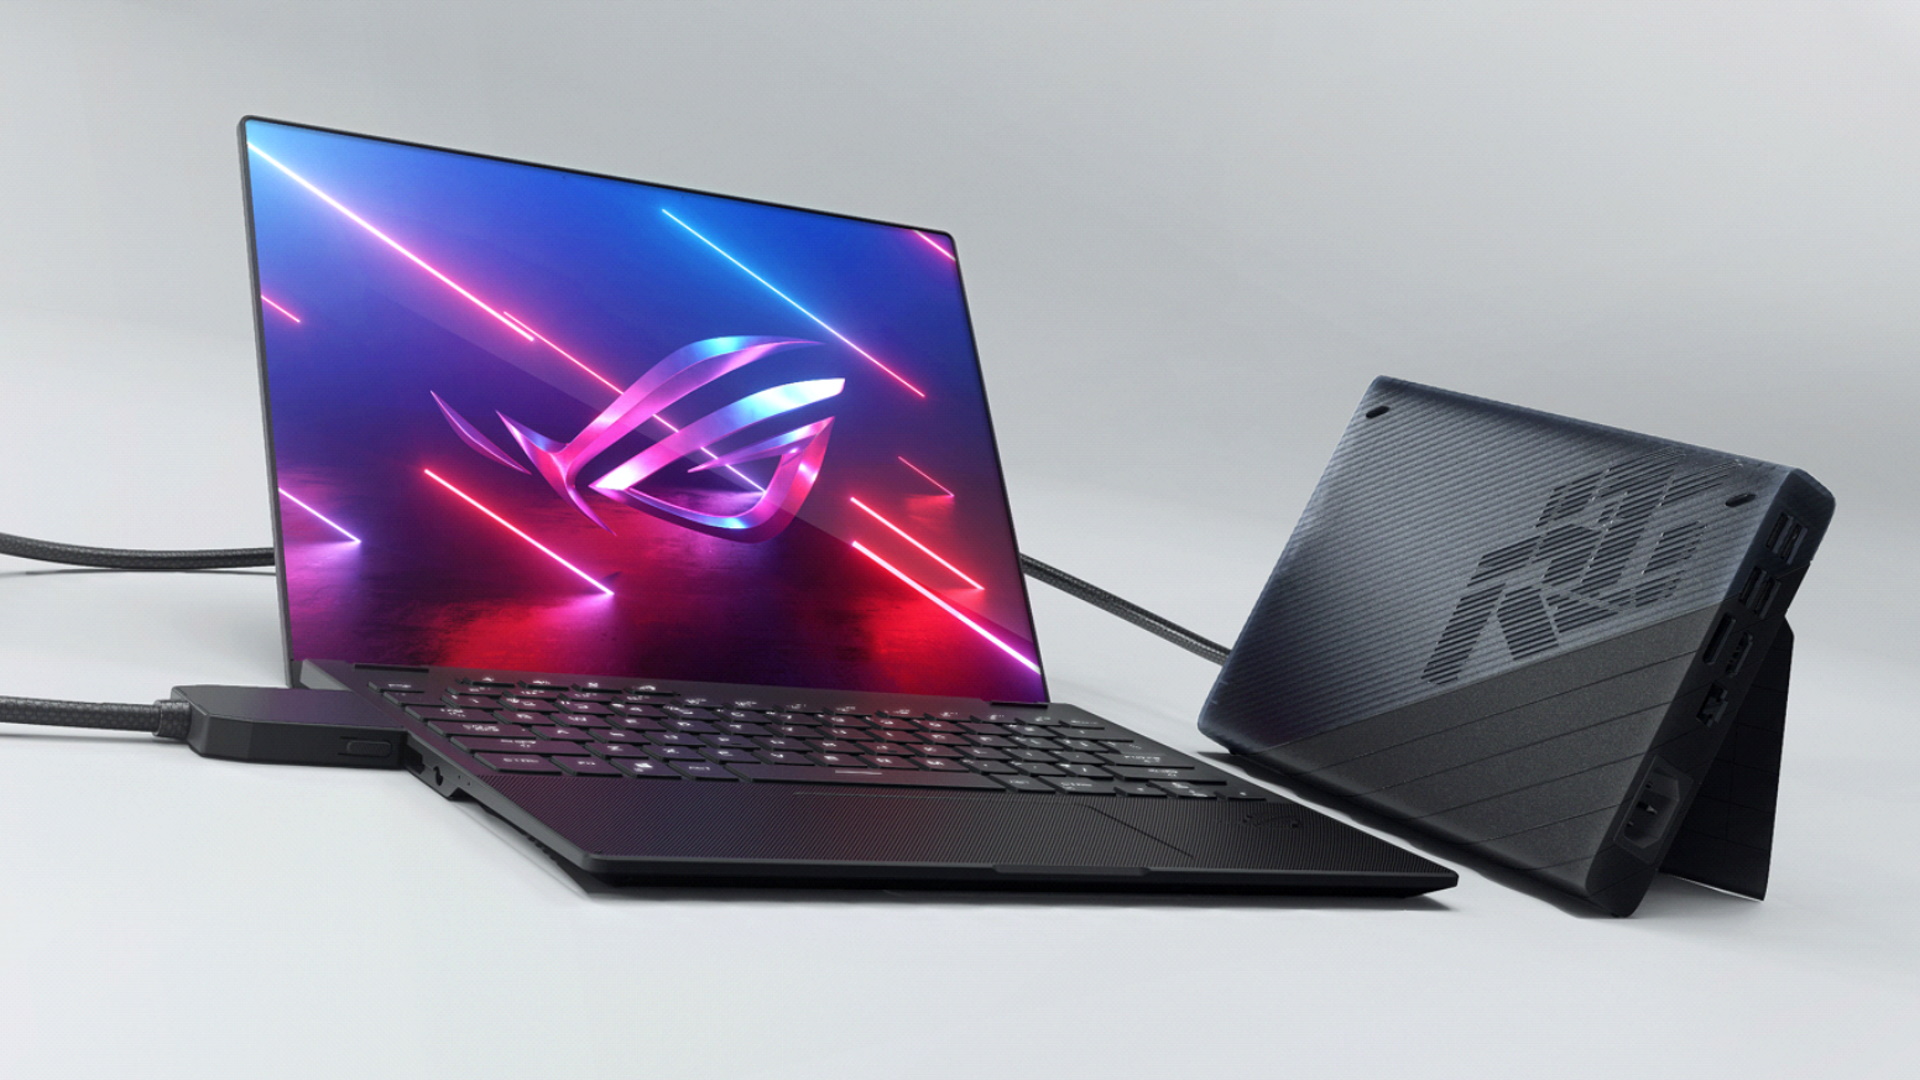  The Asus ROG Flow X13 is the most exciting laptop at CES 2021 